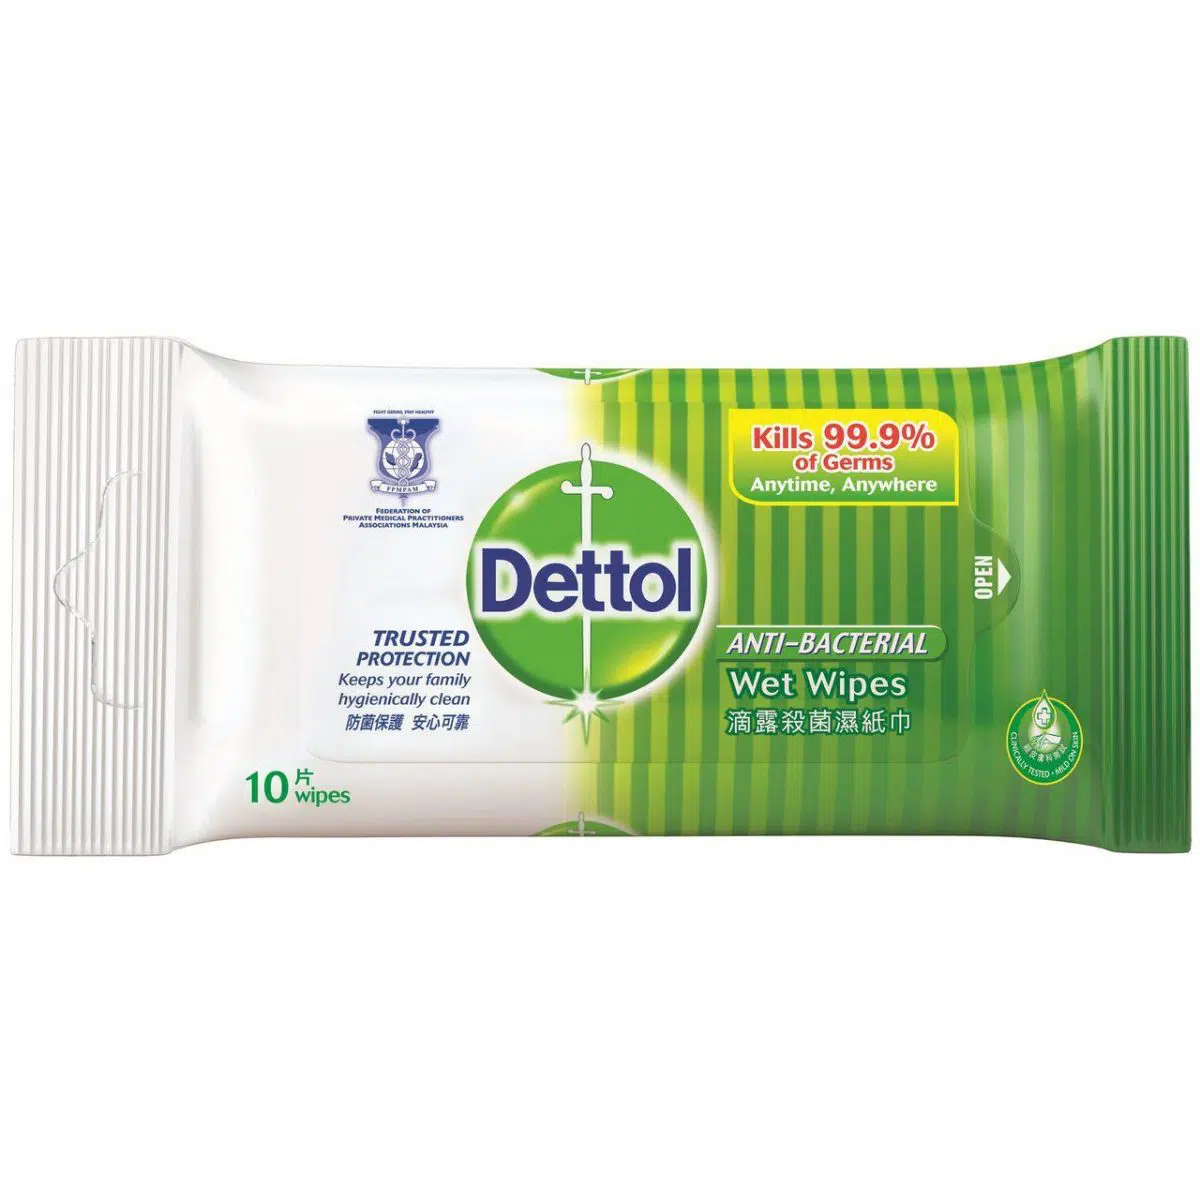 Dettol Anti-Bacterial Wet Wipes disinfectant